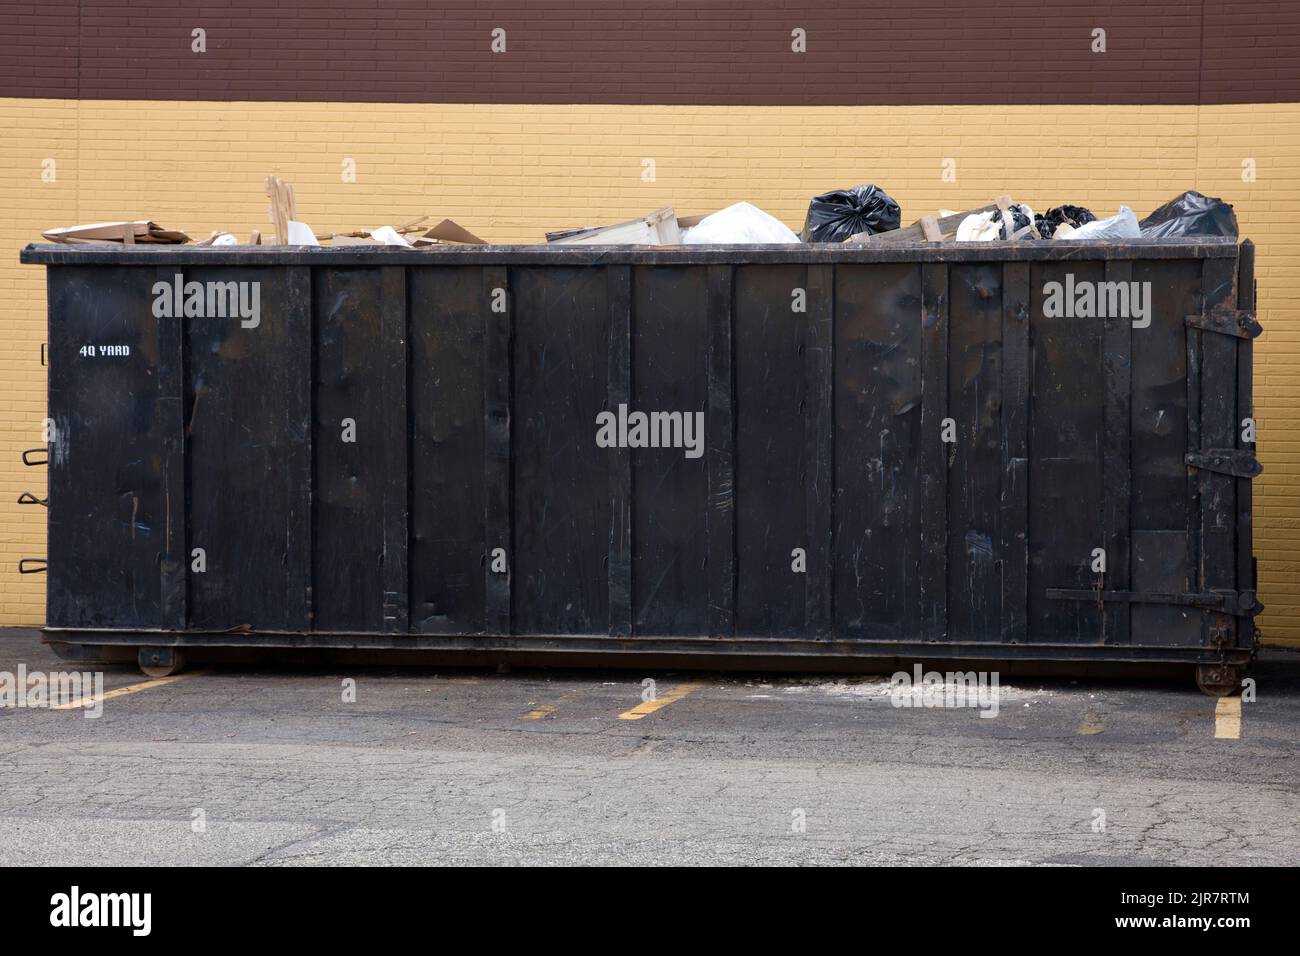 40 cubic yard dumpster container full of garbage. Stock Photo